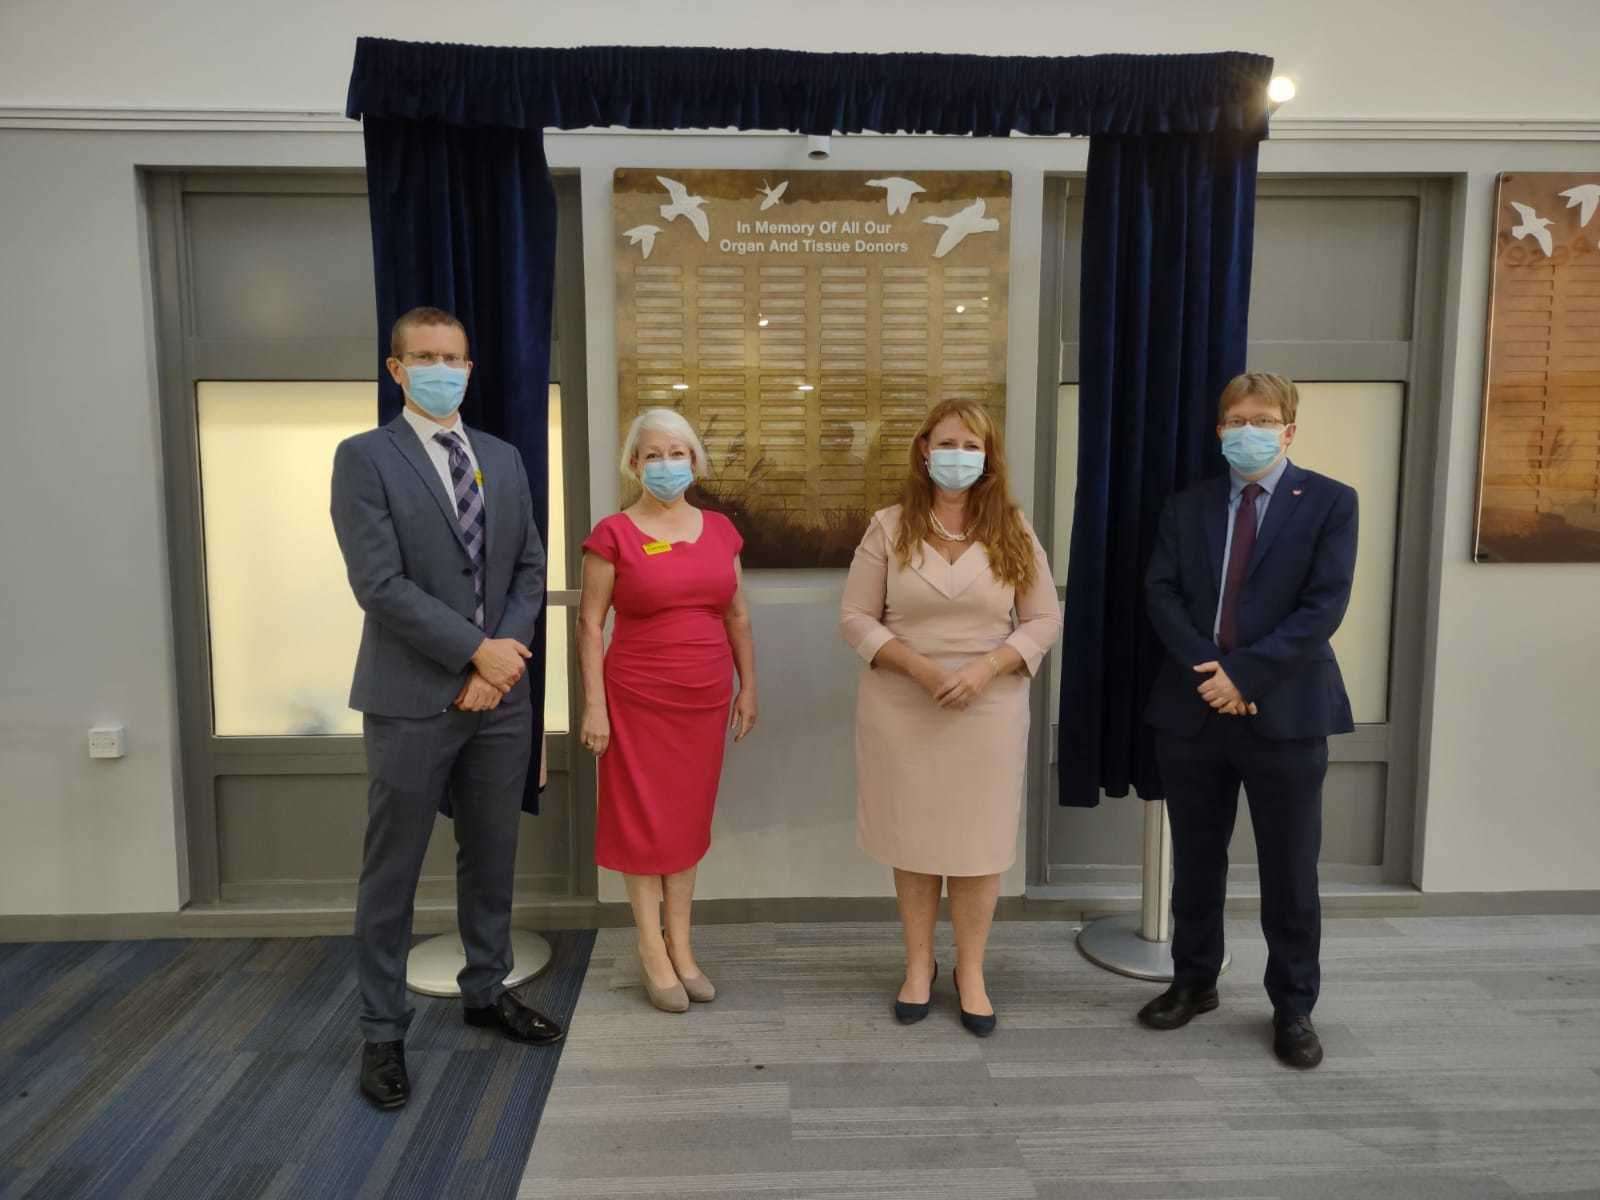 A new organ donor memorial wall commemorating people who have helped save lives by donating organs has been unveiled at Medway hospital in Gillingham. From left Dr Paul Hayden, Medway NHS Trust clinical lead for organ donation, Dr Gill Fargher, chairman of the trust’s organ donation committee, Jo Palmer Medway NHS Trust chairman and Dr Dale Gardiner national clinical lead at NHS Blood and Transplant